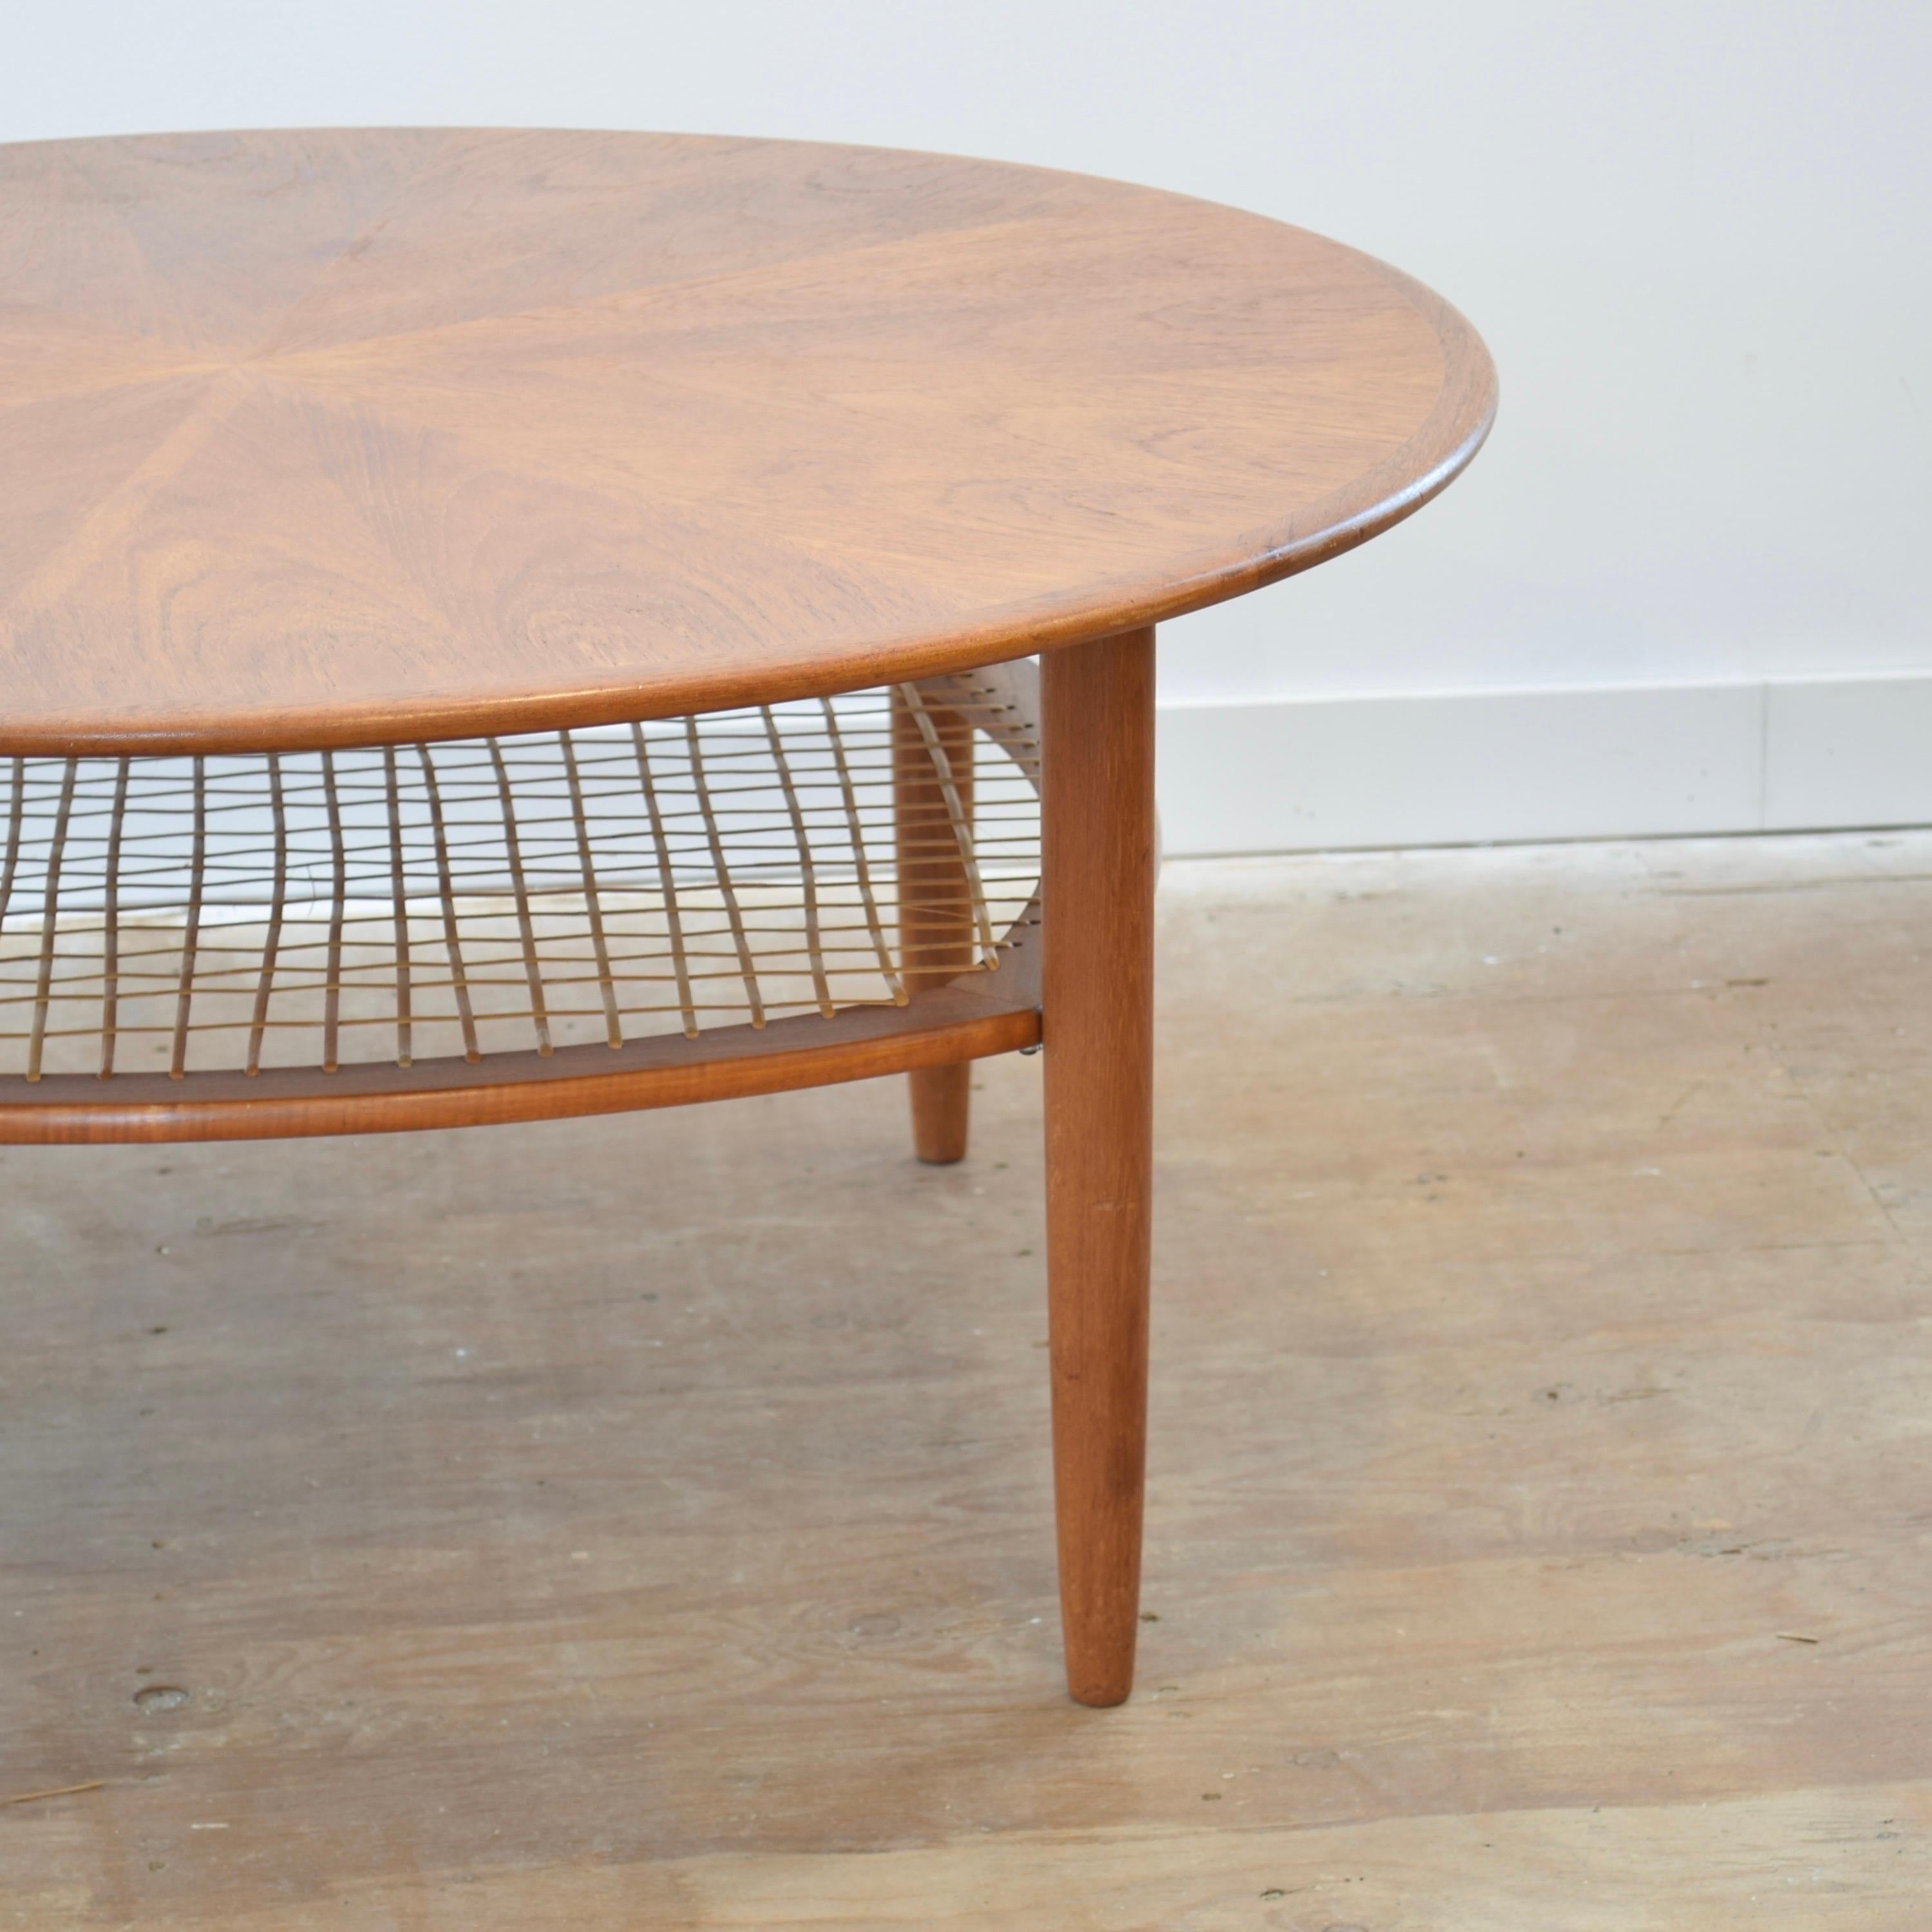 Canadian Mid Century Teak & Cane Coffee Table For Sale